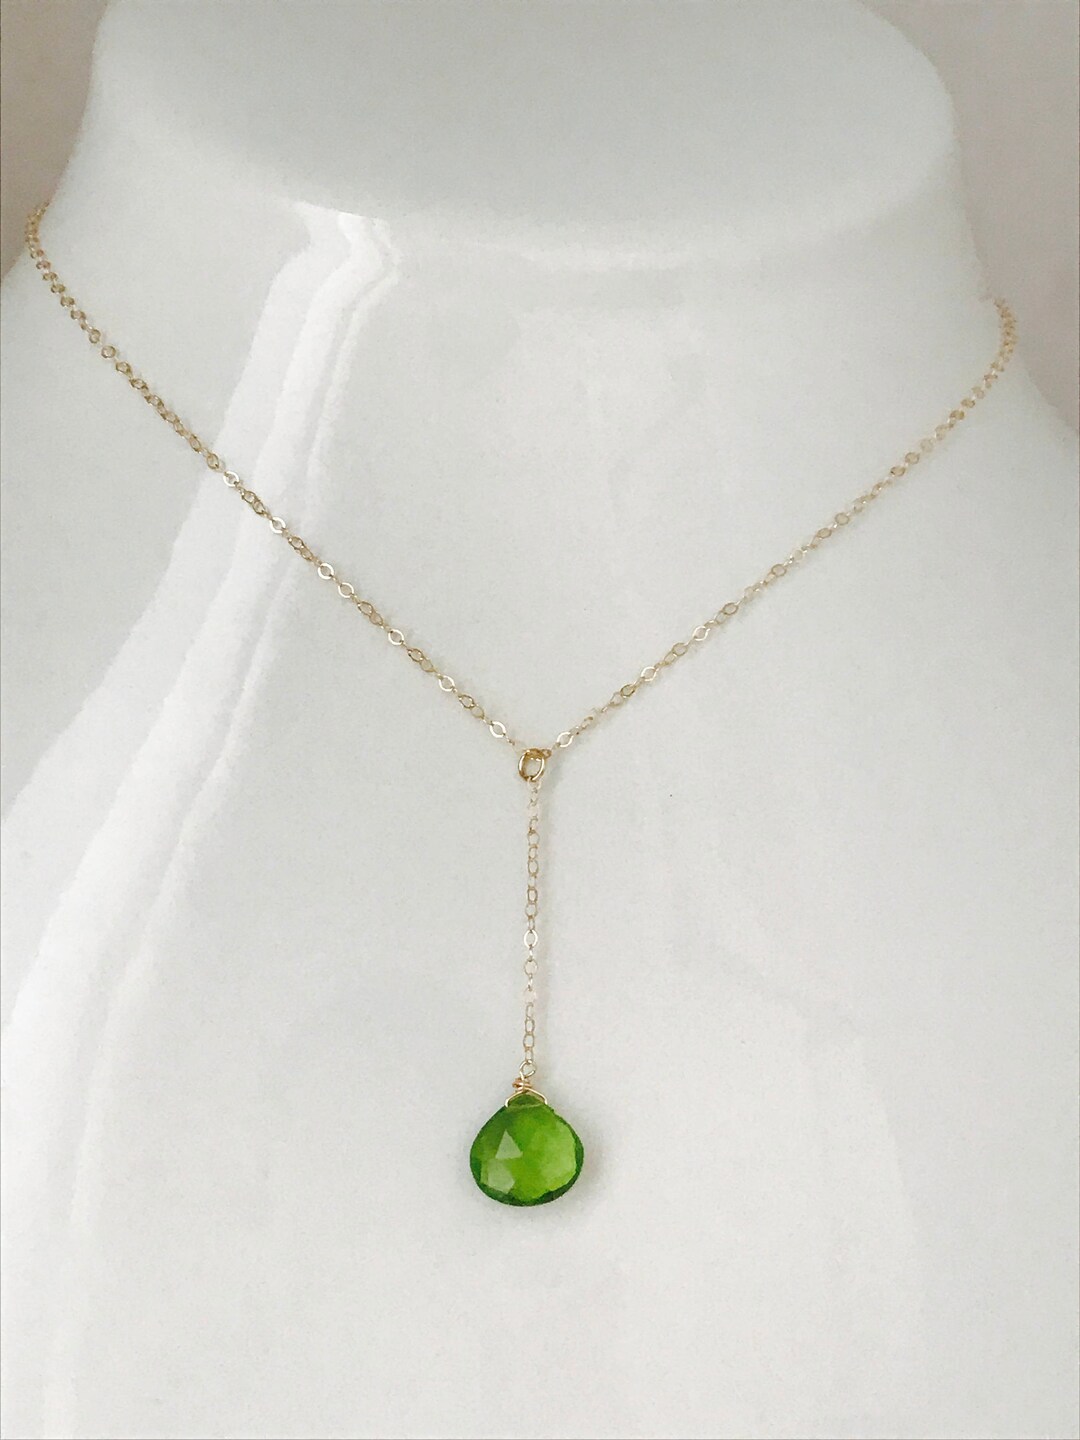 Peridot Necklace Y Necklace Healing Necklace August Birthstone - Etsy